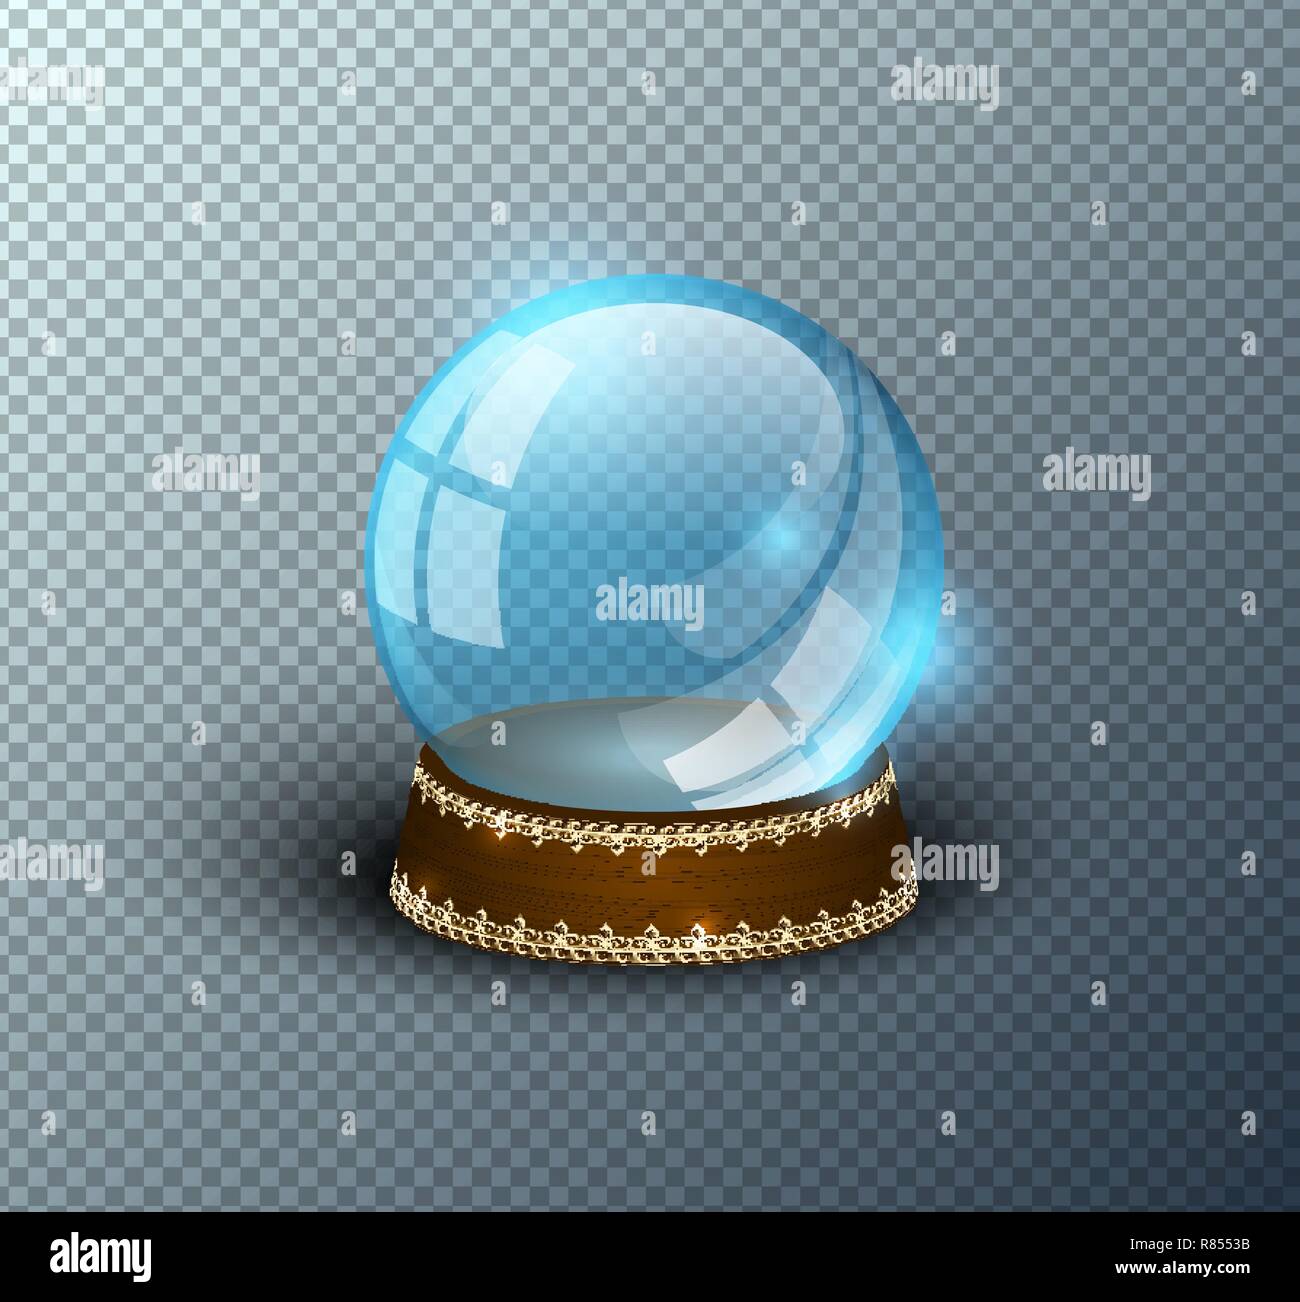 Vector snow globe empty template isolated transparent background. Christmas magic ball. Blue glass ball dome, wooden stand with golden crown decor Stock Vector